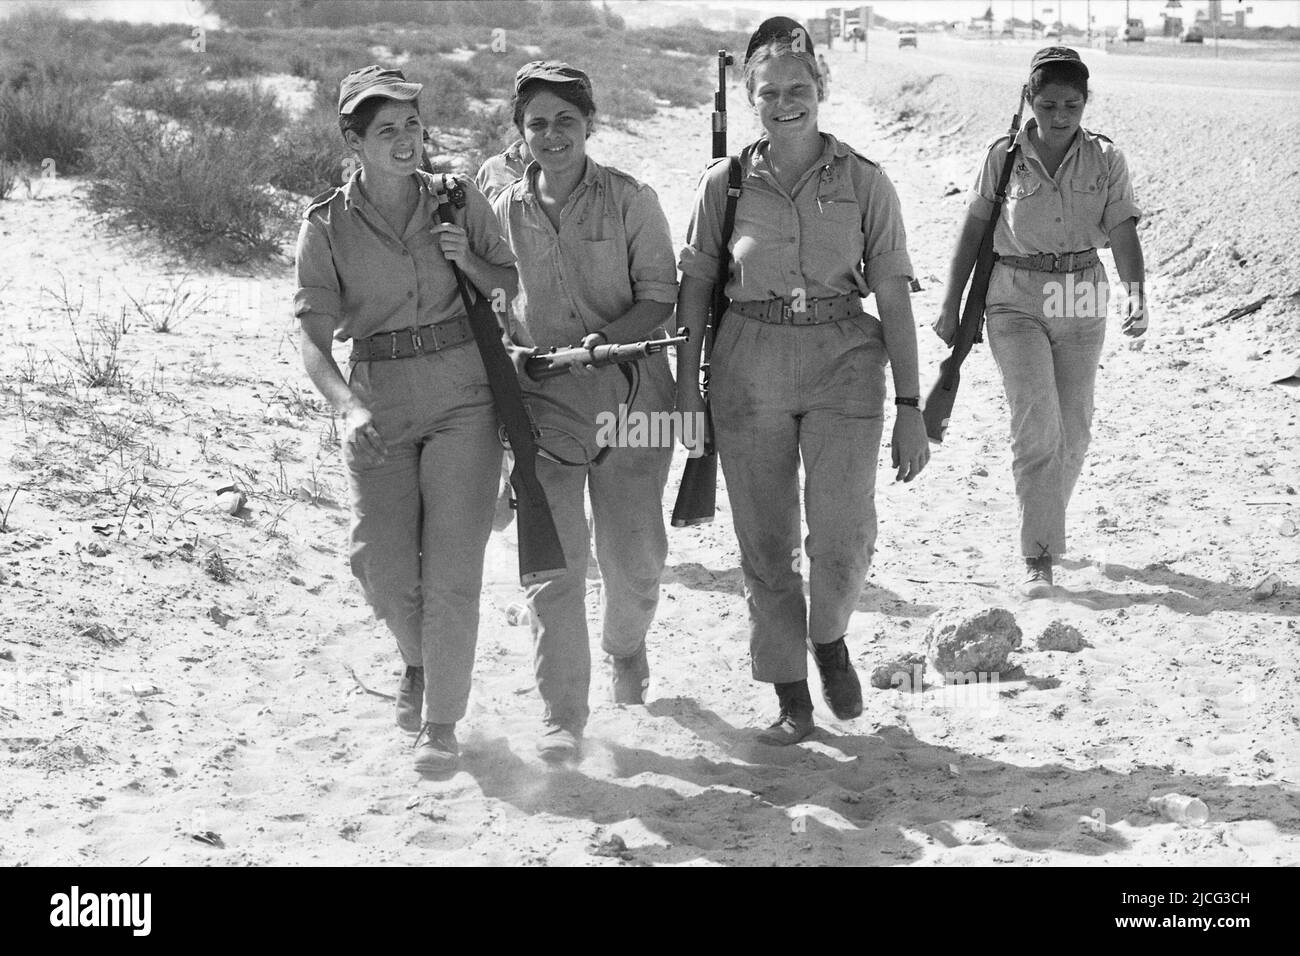 Israeli women soldiers marching with their rifles, during basic training, during the march, during the Yom Kippur War, The Yom Kippur War between Israel and the Arab states of Egypt, Jordan and Syria lasted from October 6th to October 25th, 1973, Stock Photo